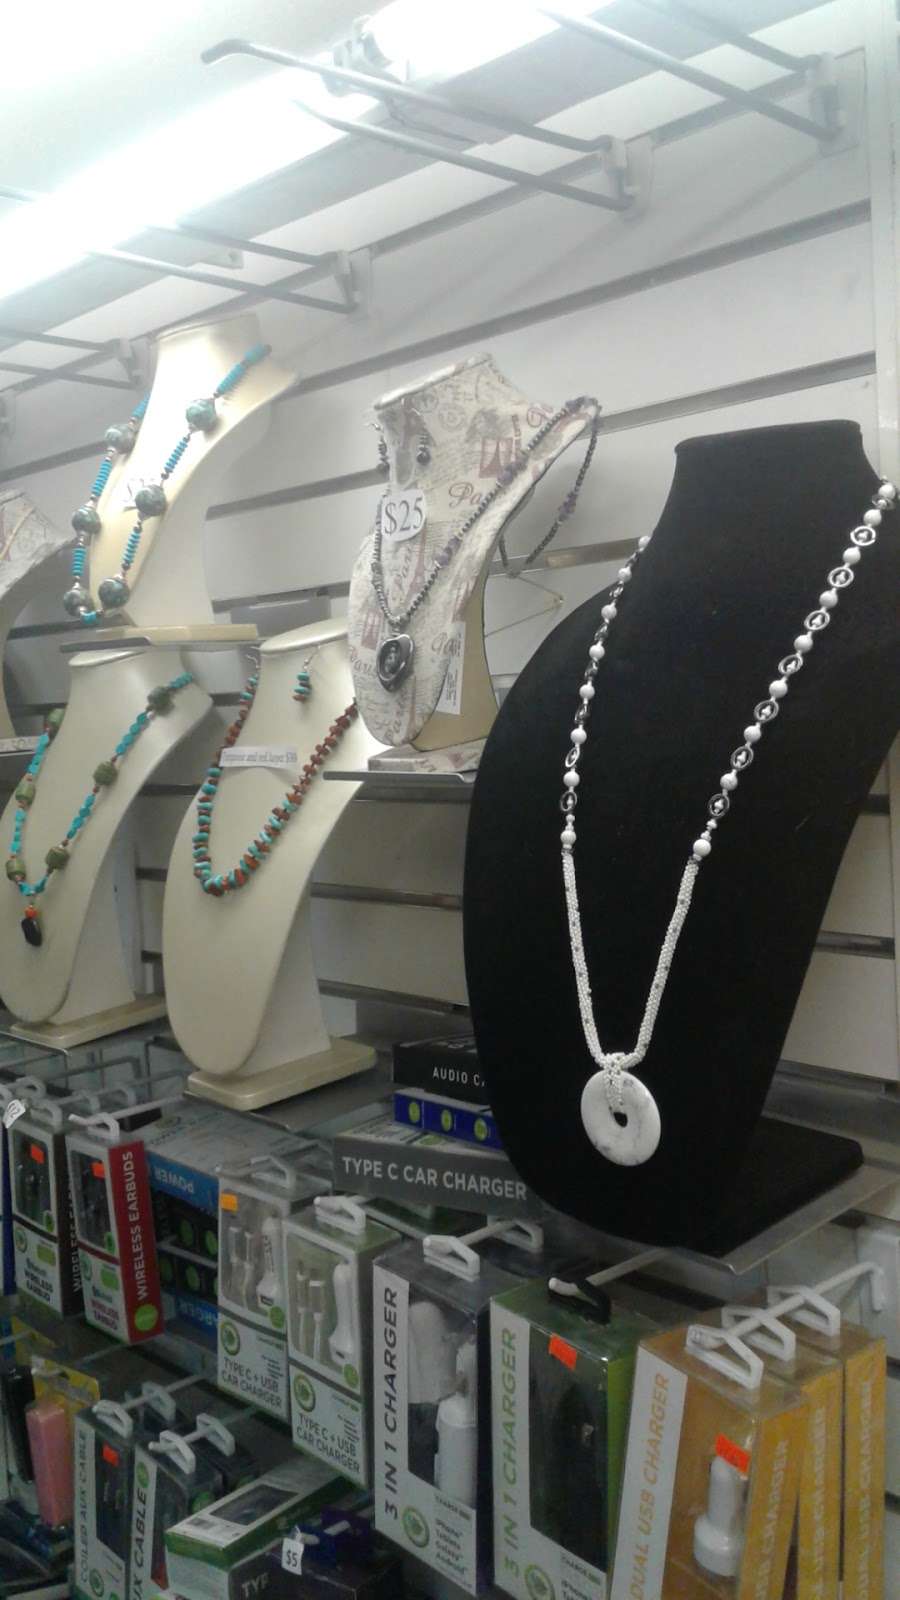 J&R Accessories and Much More | 5748 W Glendale Ave, Glendale, AZ 85301, USA | Phone: (623) 915-6792